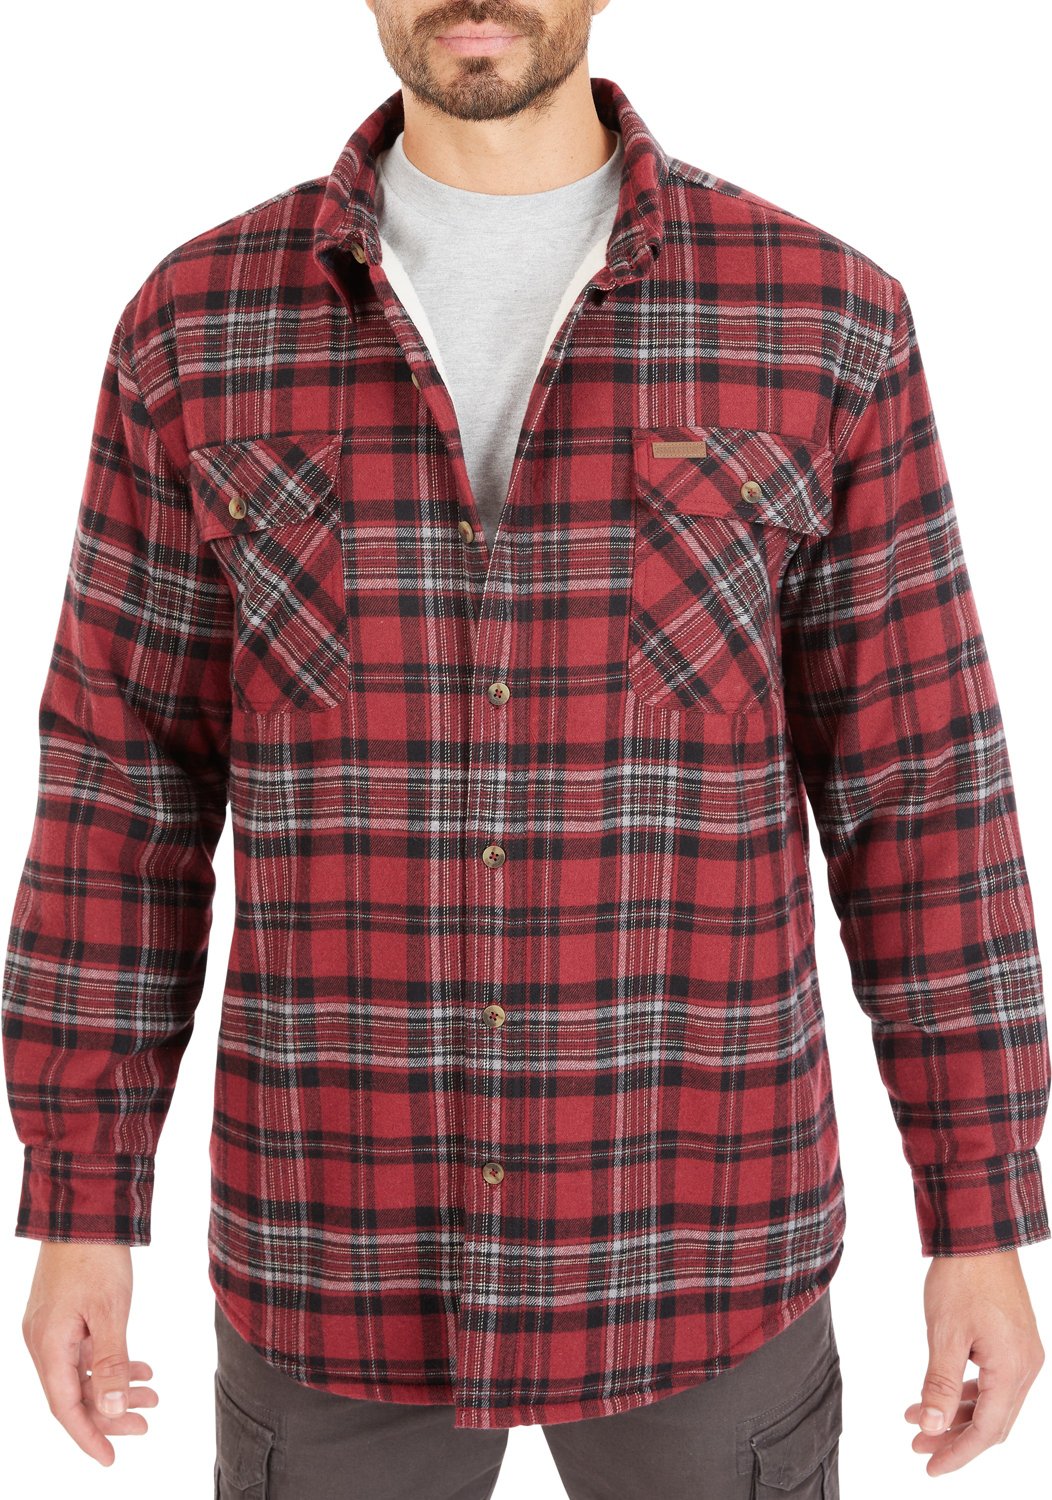 Smith's Workwear Men's Big & Tall Sherpa-Lined Flannel Shirt Jacket ...